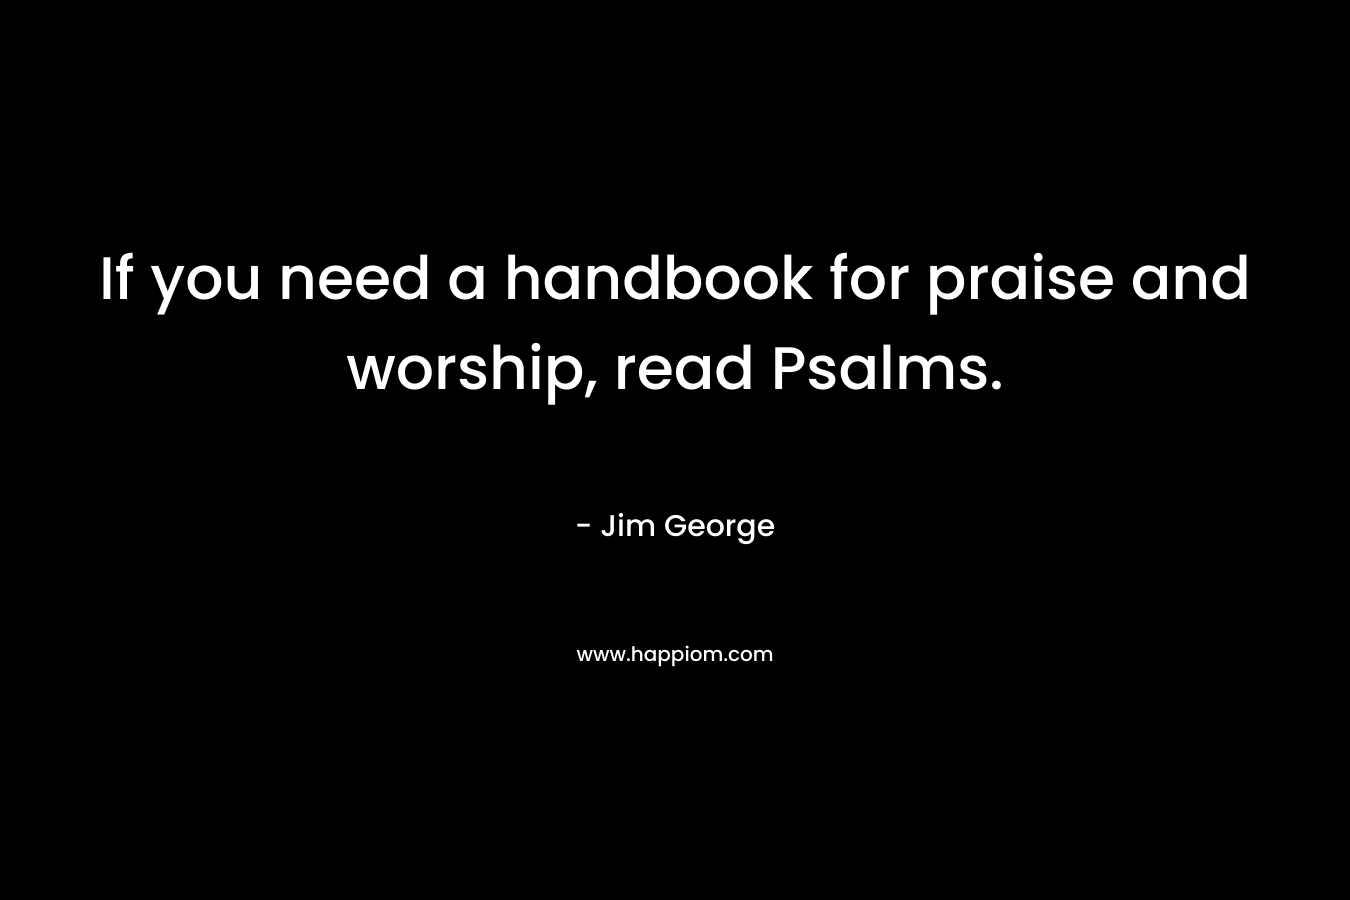 If you need a handbook for praise and worship, read Psalms.